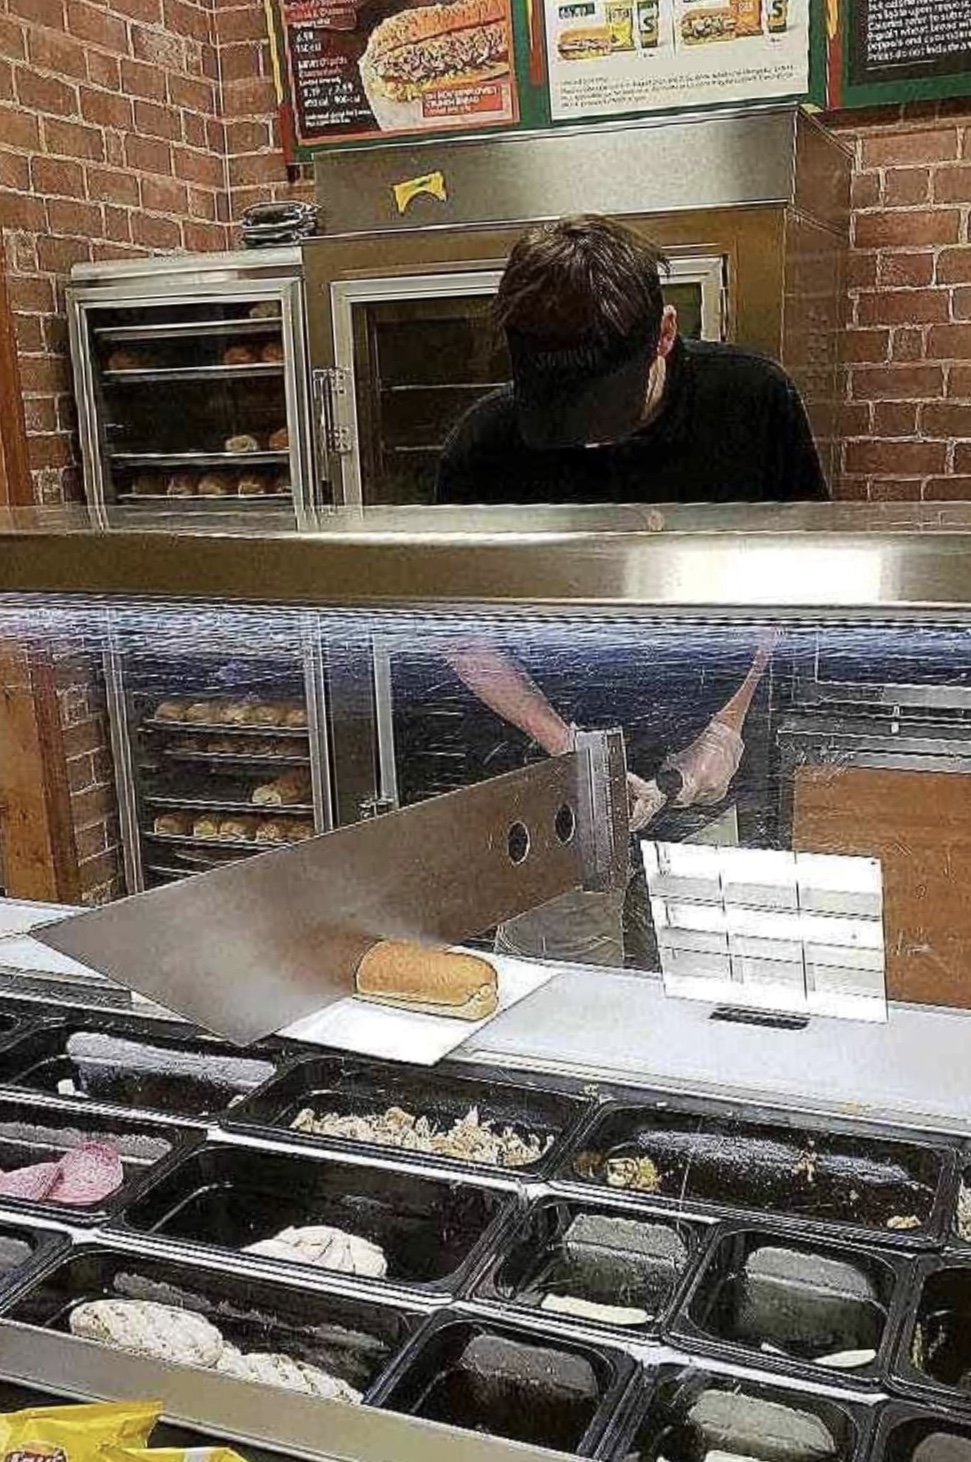 cutting subway with sword